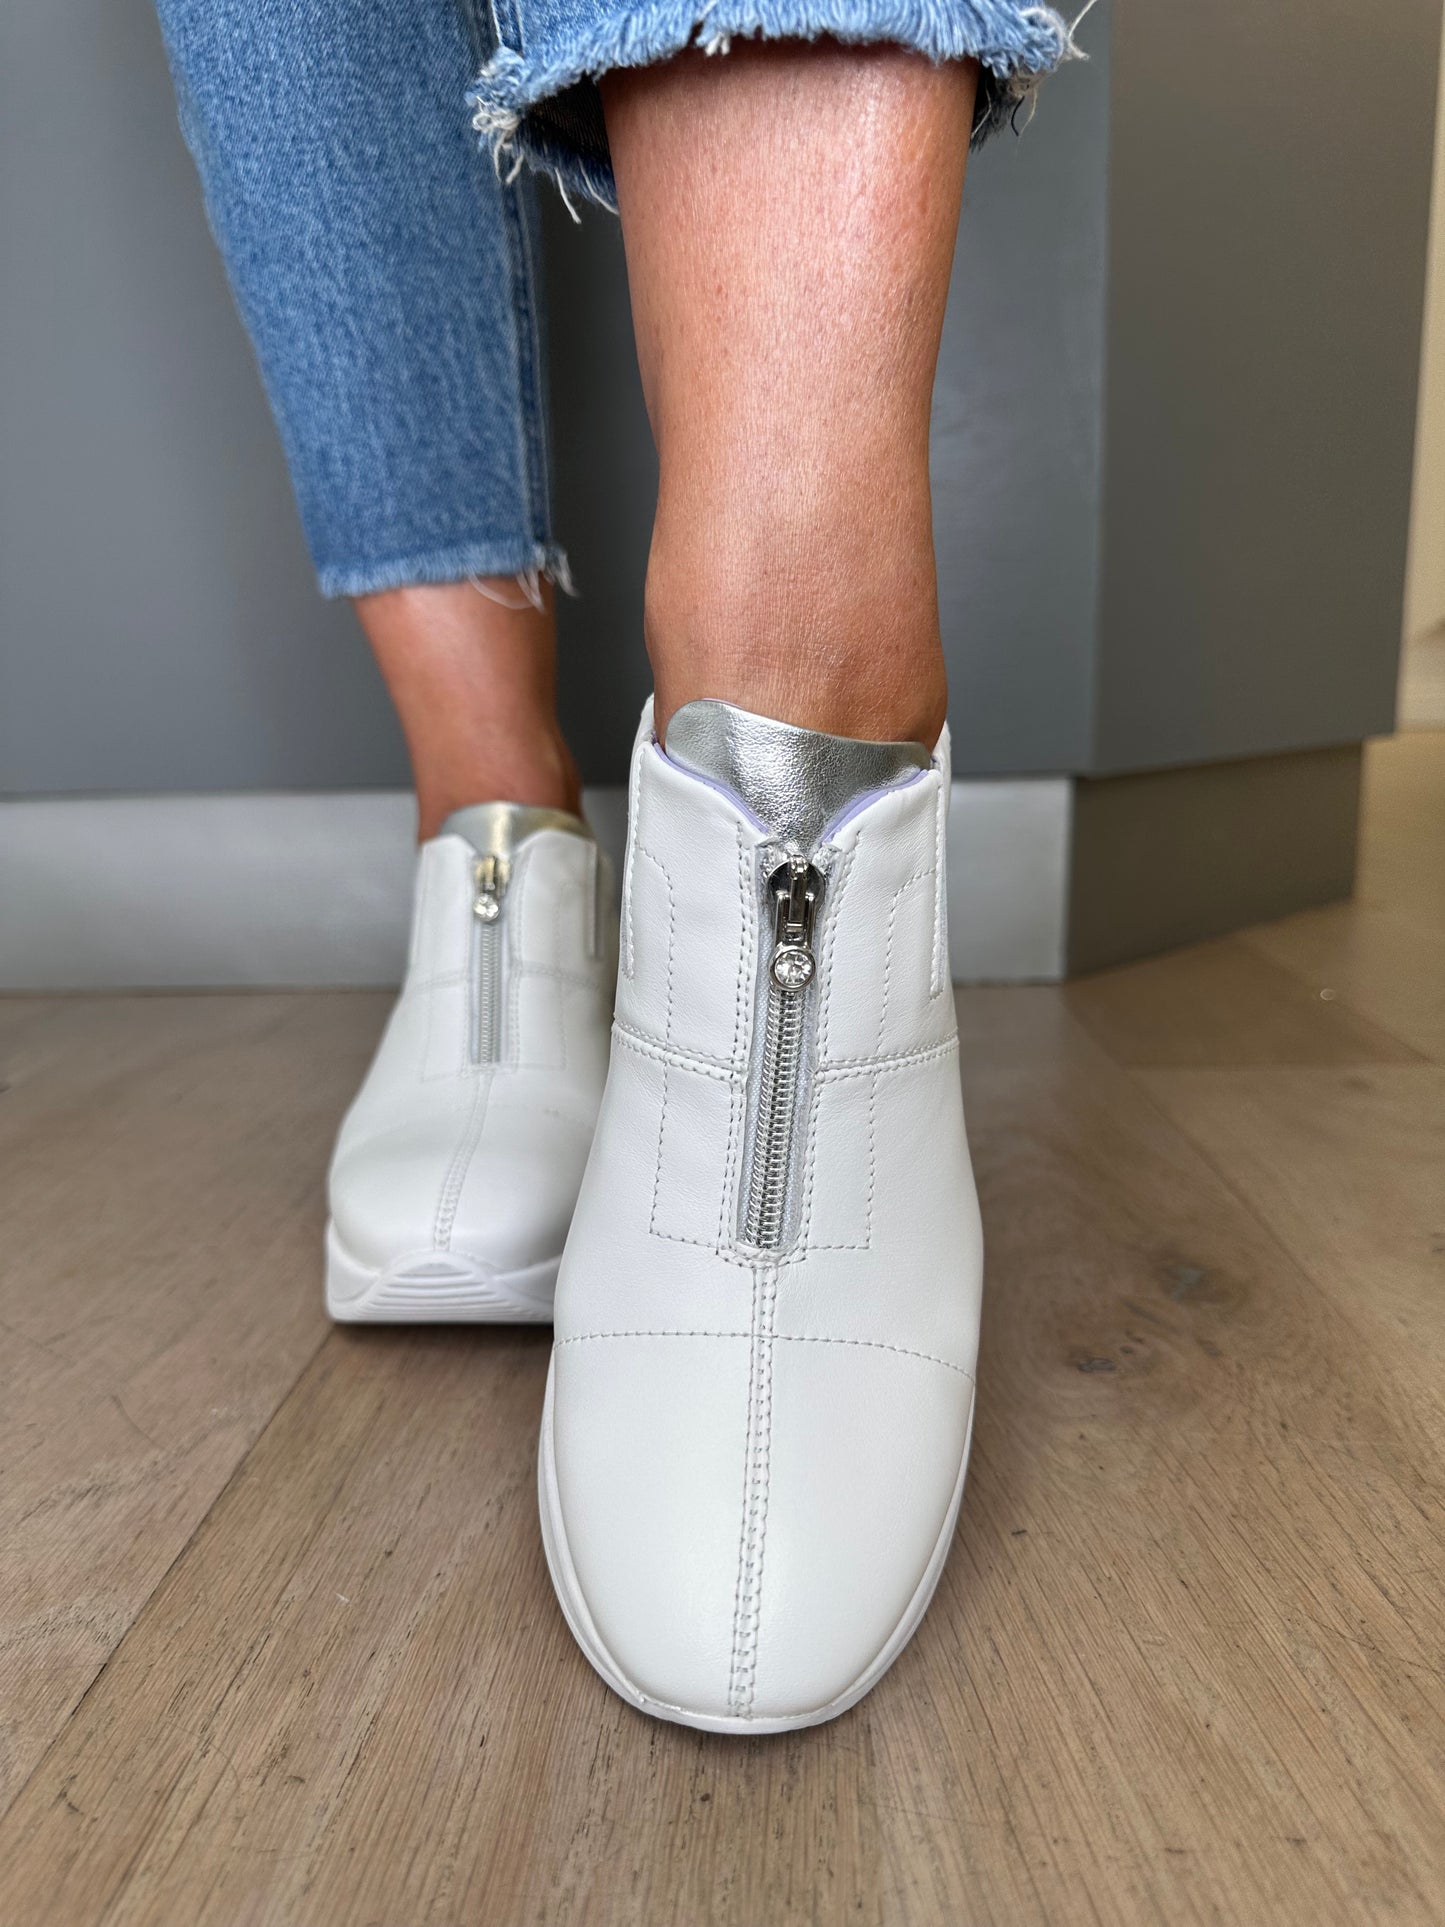 Marco Moreo - Marlies White Zip Up Shoe With A Wedge Sole And Soft Gold/Silver Trim